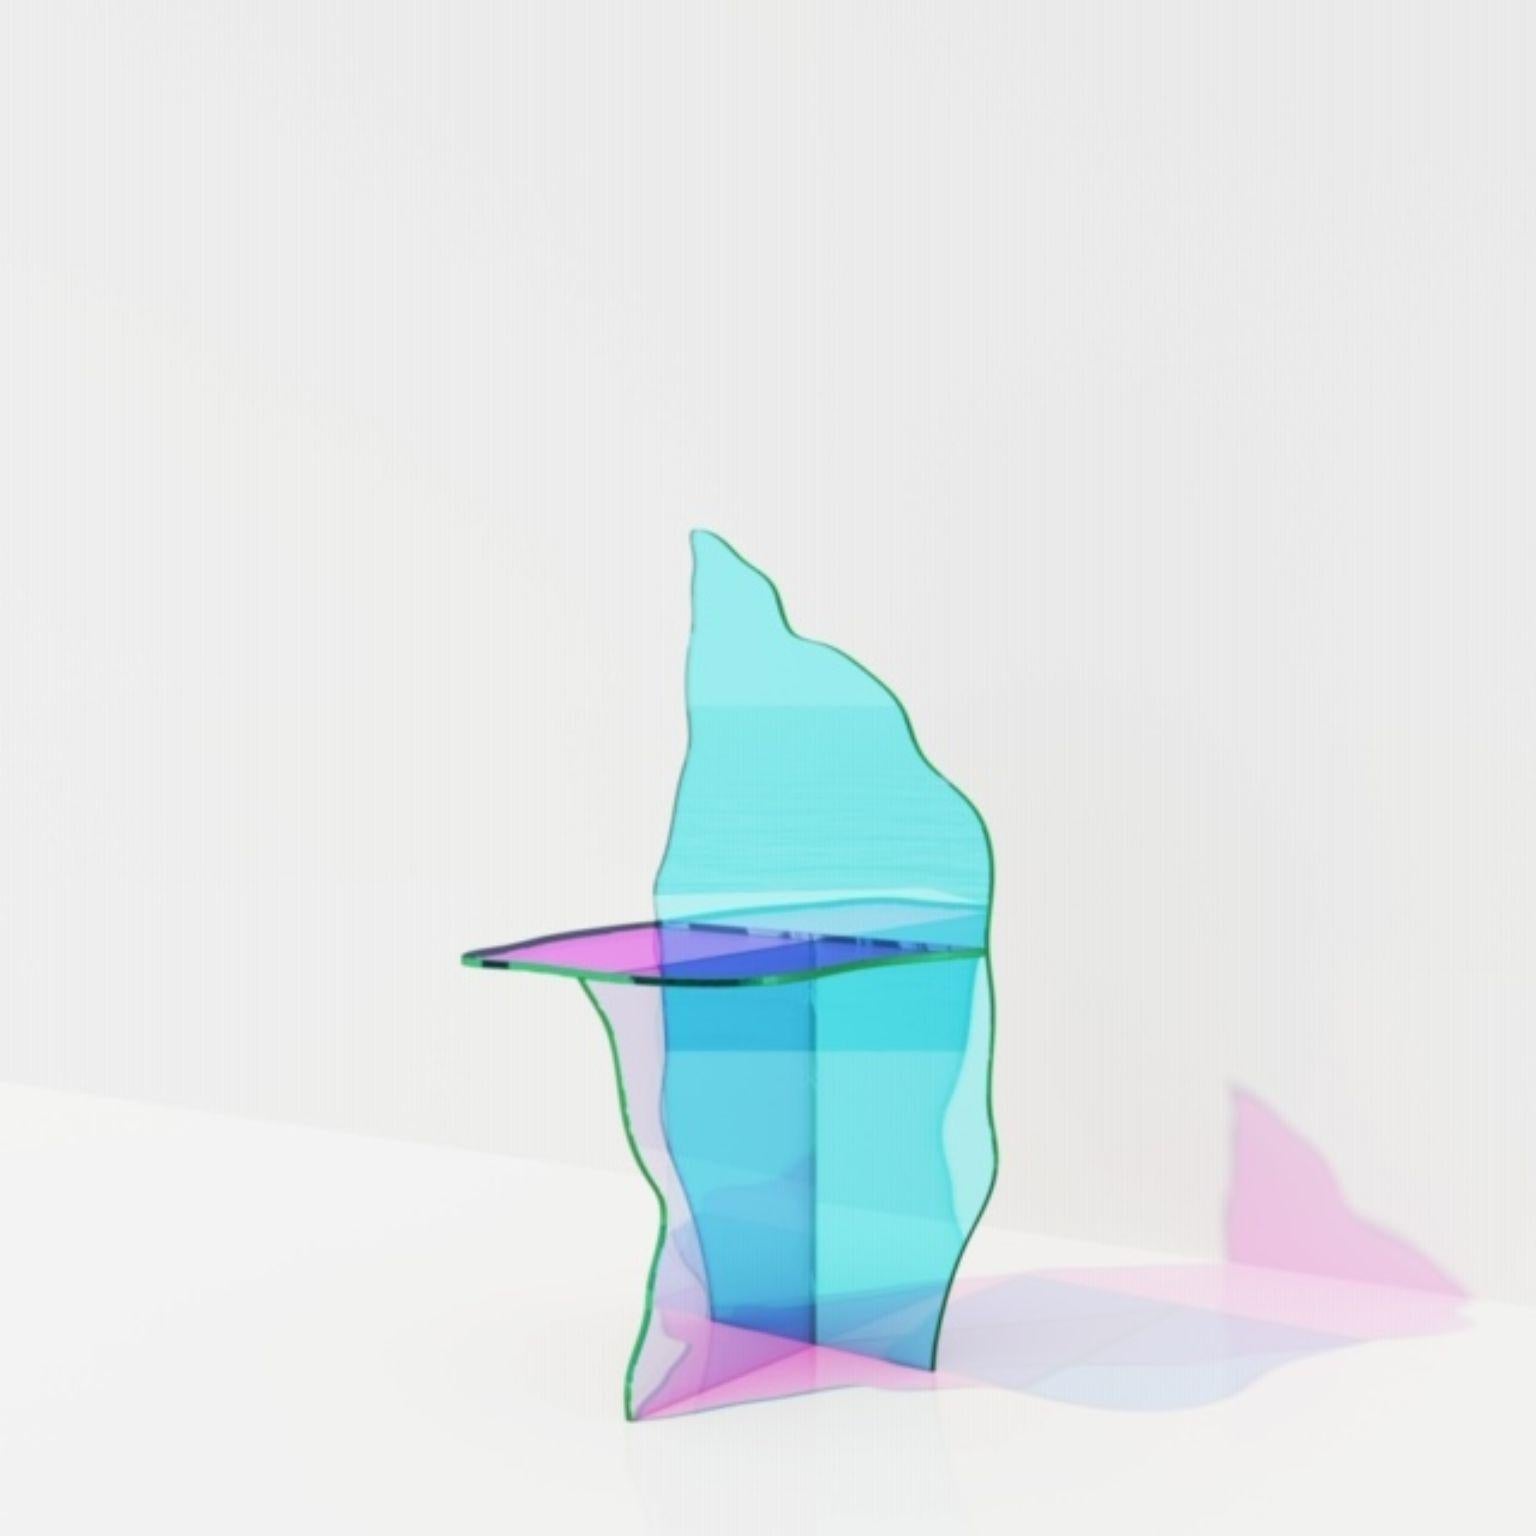 Isola chair by Brajak Vitberg
Dimensions: 43 x 55 x 100 cm
Materials: Dichroic glass

Can be made in Satin glass finish. Please contact us.

Bijelic and Brajak are two architects from Ljubljana, Slovenia.
They are striving to design craft